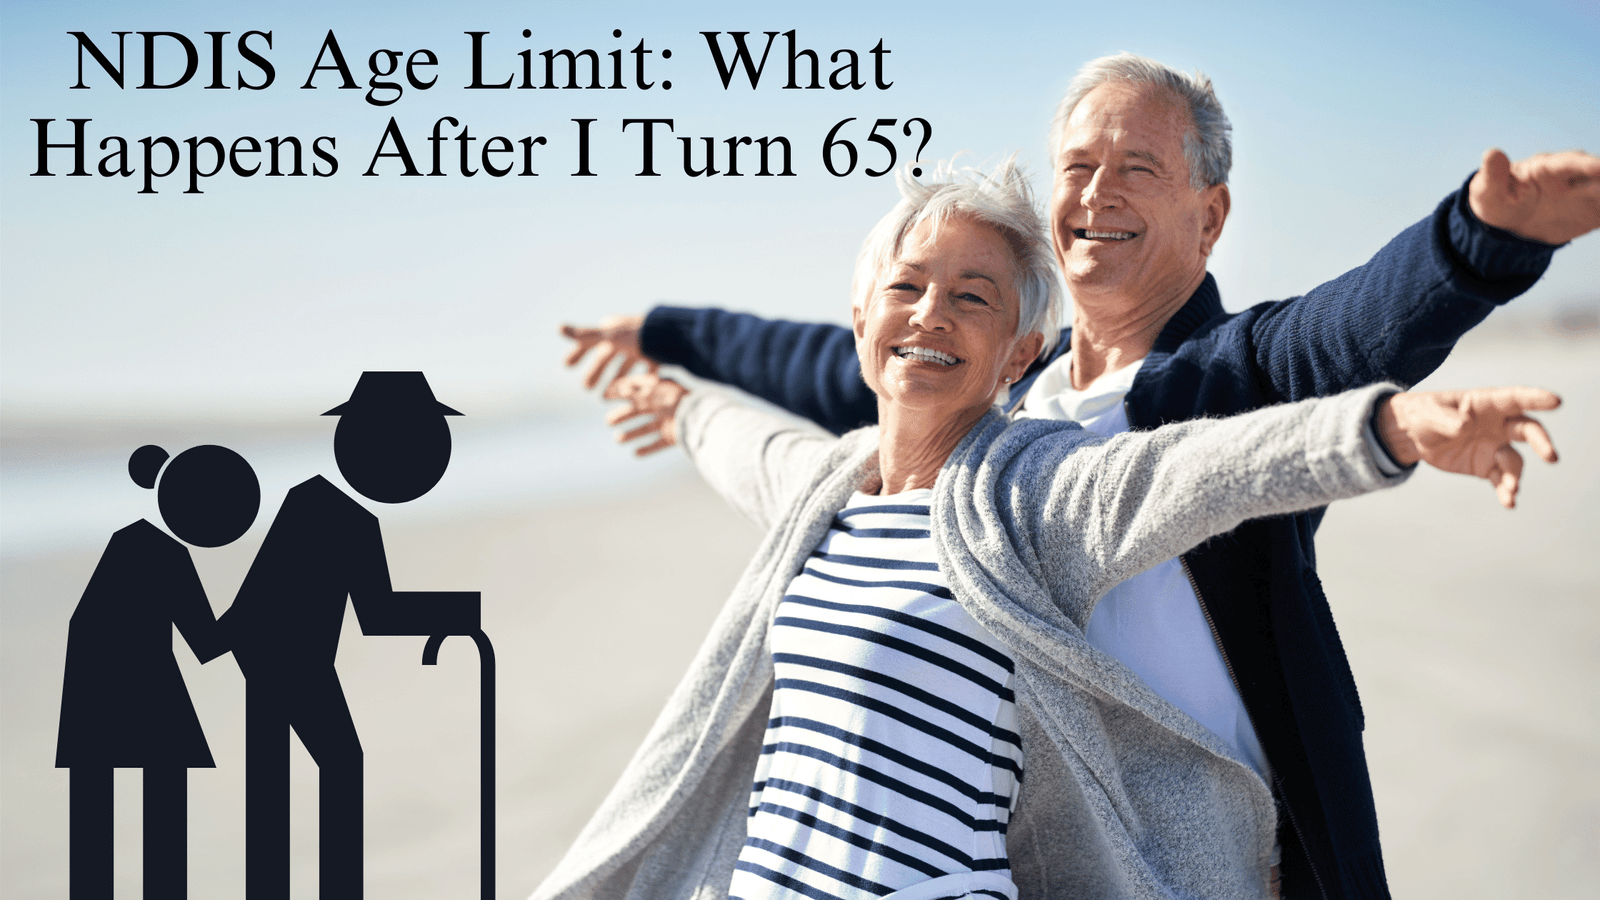 NDIS Age Limit: What Happens After I Turn 65?